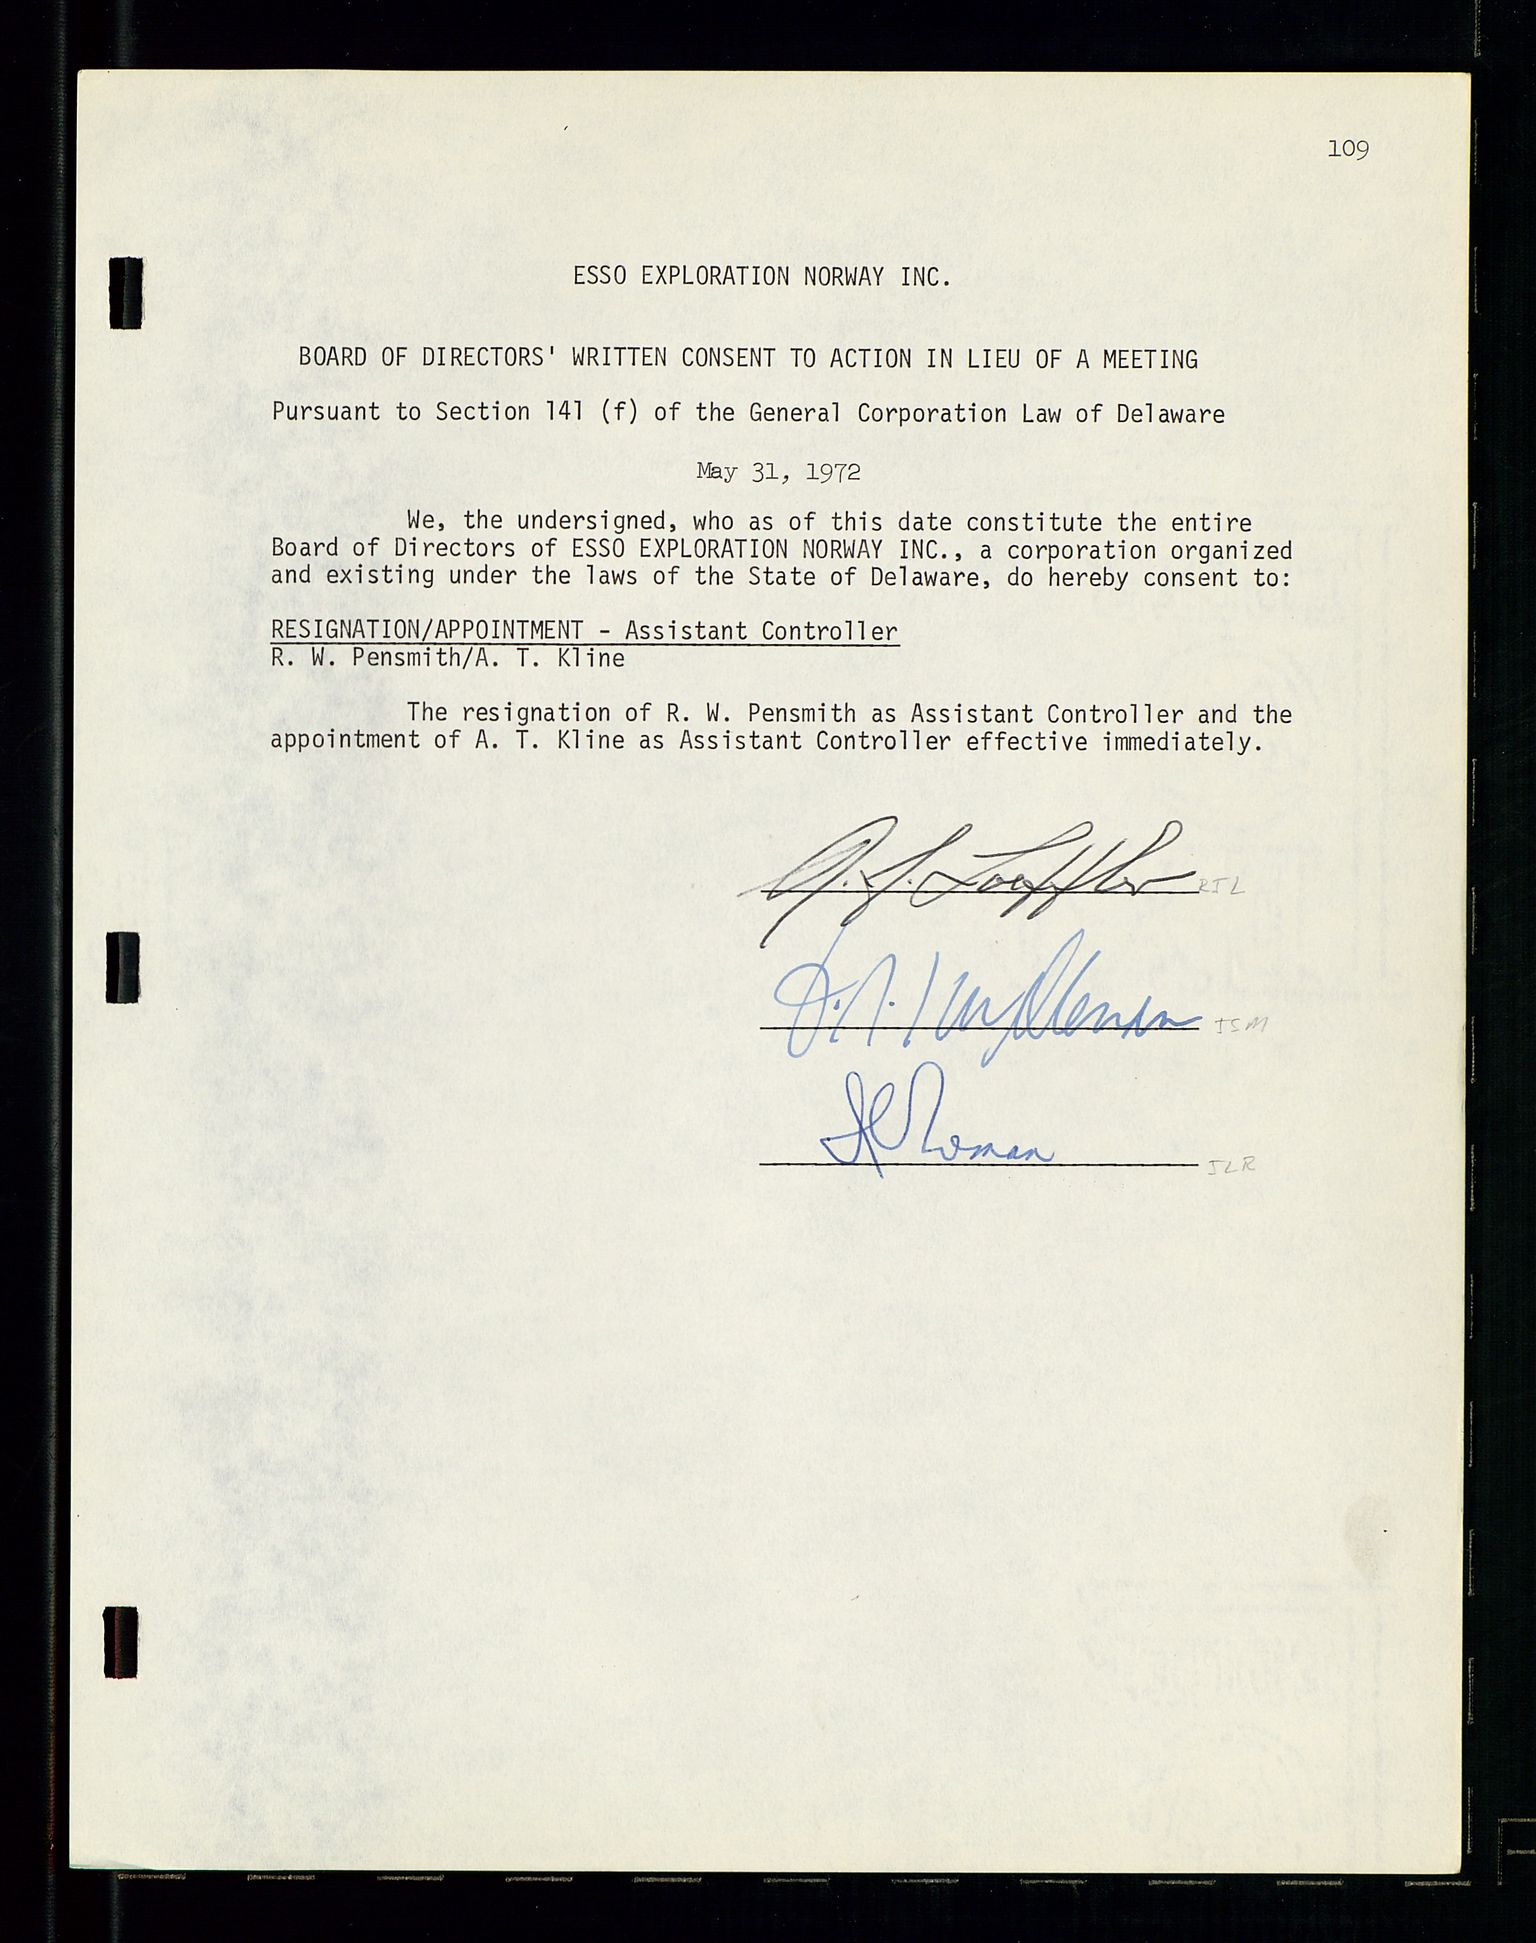 Pa 1512 - Esso Exploration and Production Norway Inc., SAST/A-101917/A/Aa/L0001/0001: Styredokumenter / Corporate records, By-Laws, Board meeting minutes, Incorporations, 1965-1975, s. 109